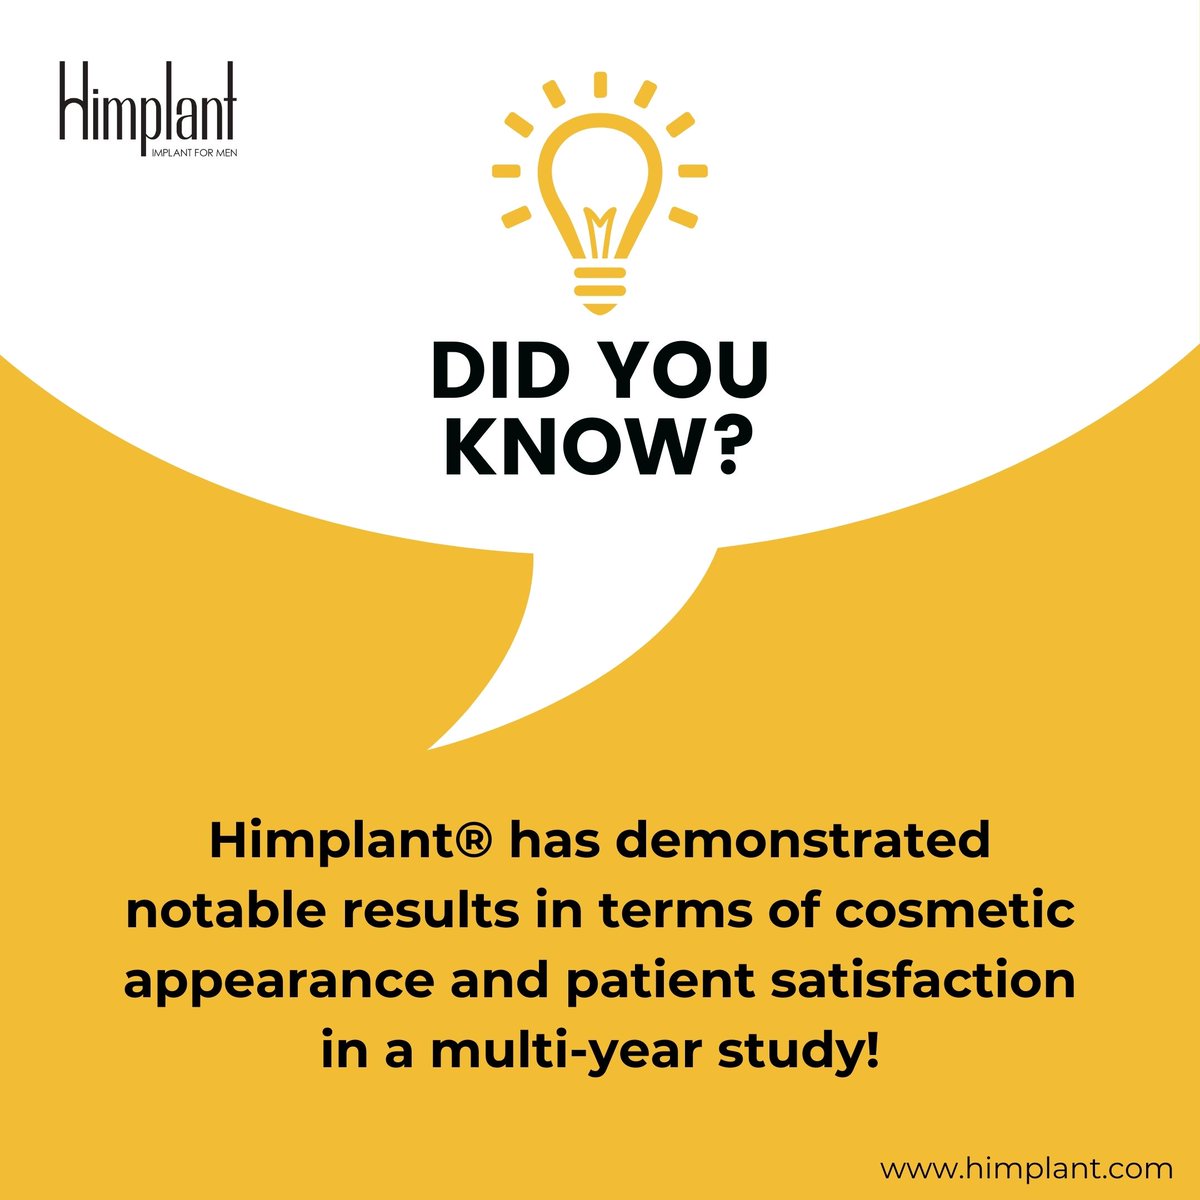 Years of study, countless satisfied clients! 📈 HIMPLANT® has demonstrated remarkable cosmetic results and satisfaction in multi-year studies. Join the success story! 

#HIMPLANT #Success #HappyPatients #Cosmetic #Procedure #Satisfaction